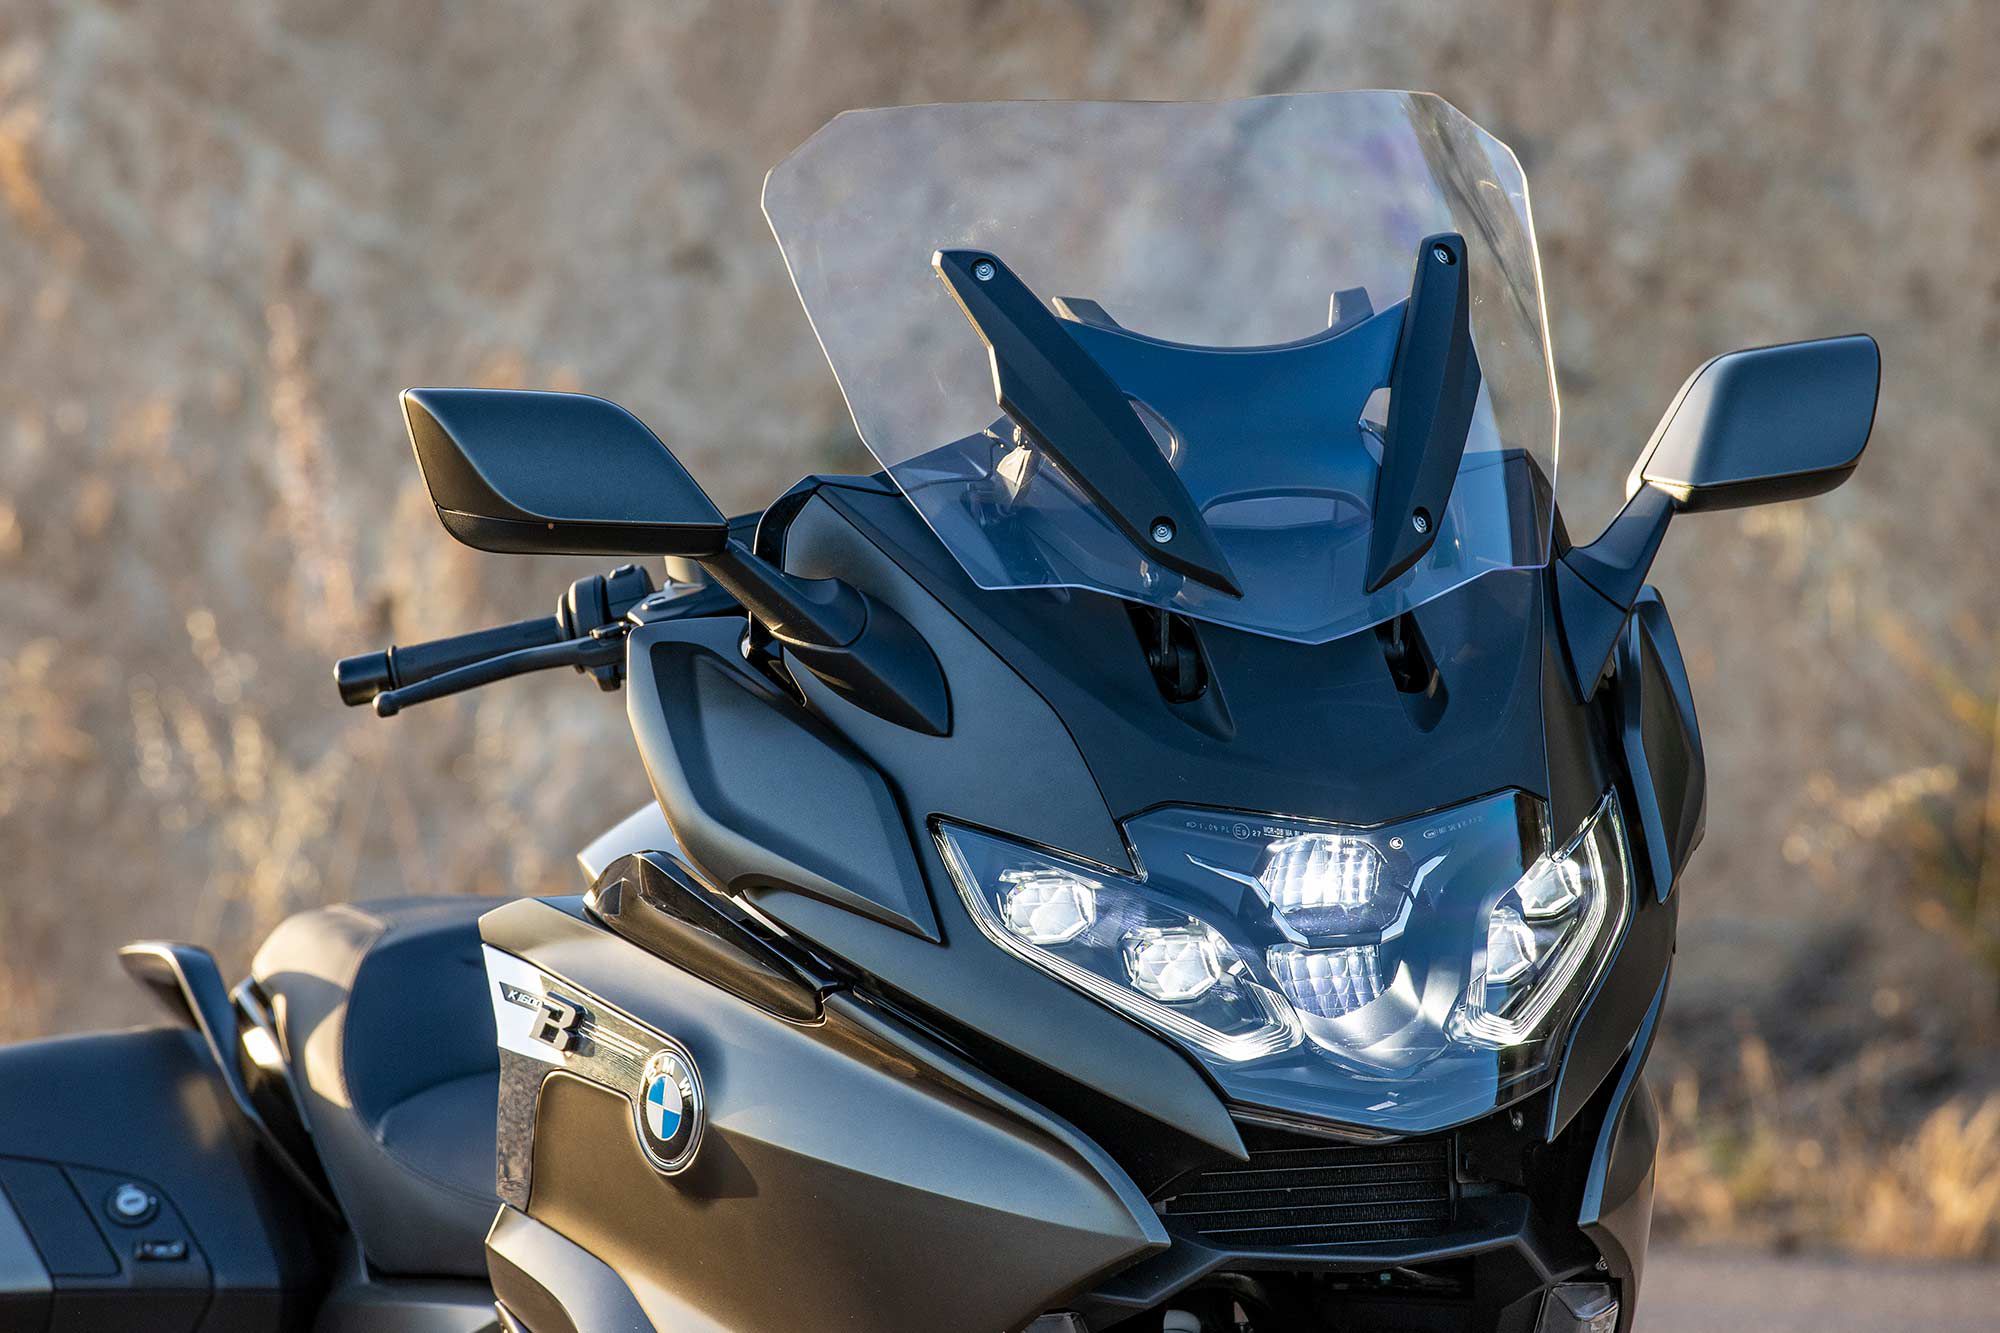 The K 1600 B’s broad front fairing and electronically adjustable windscreen do a marvelous job of shielding the rider from dirty air. Clever deflectors on either side of the fairing channel air into the cabin during warm-weather rides.